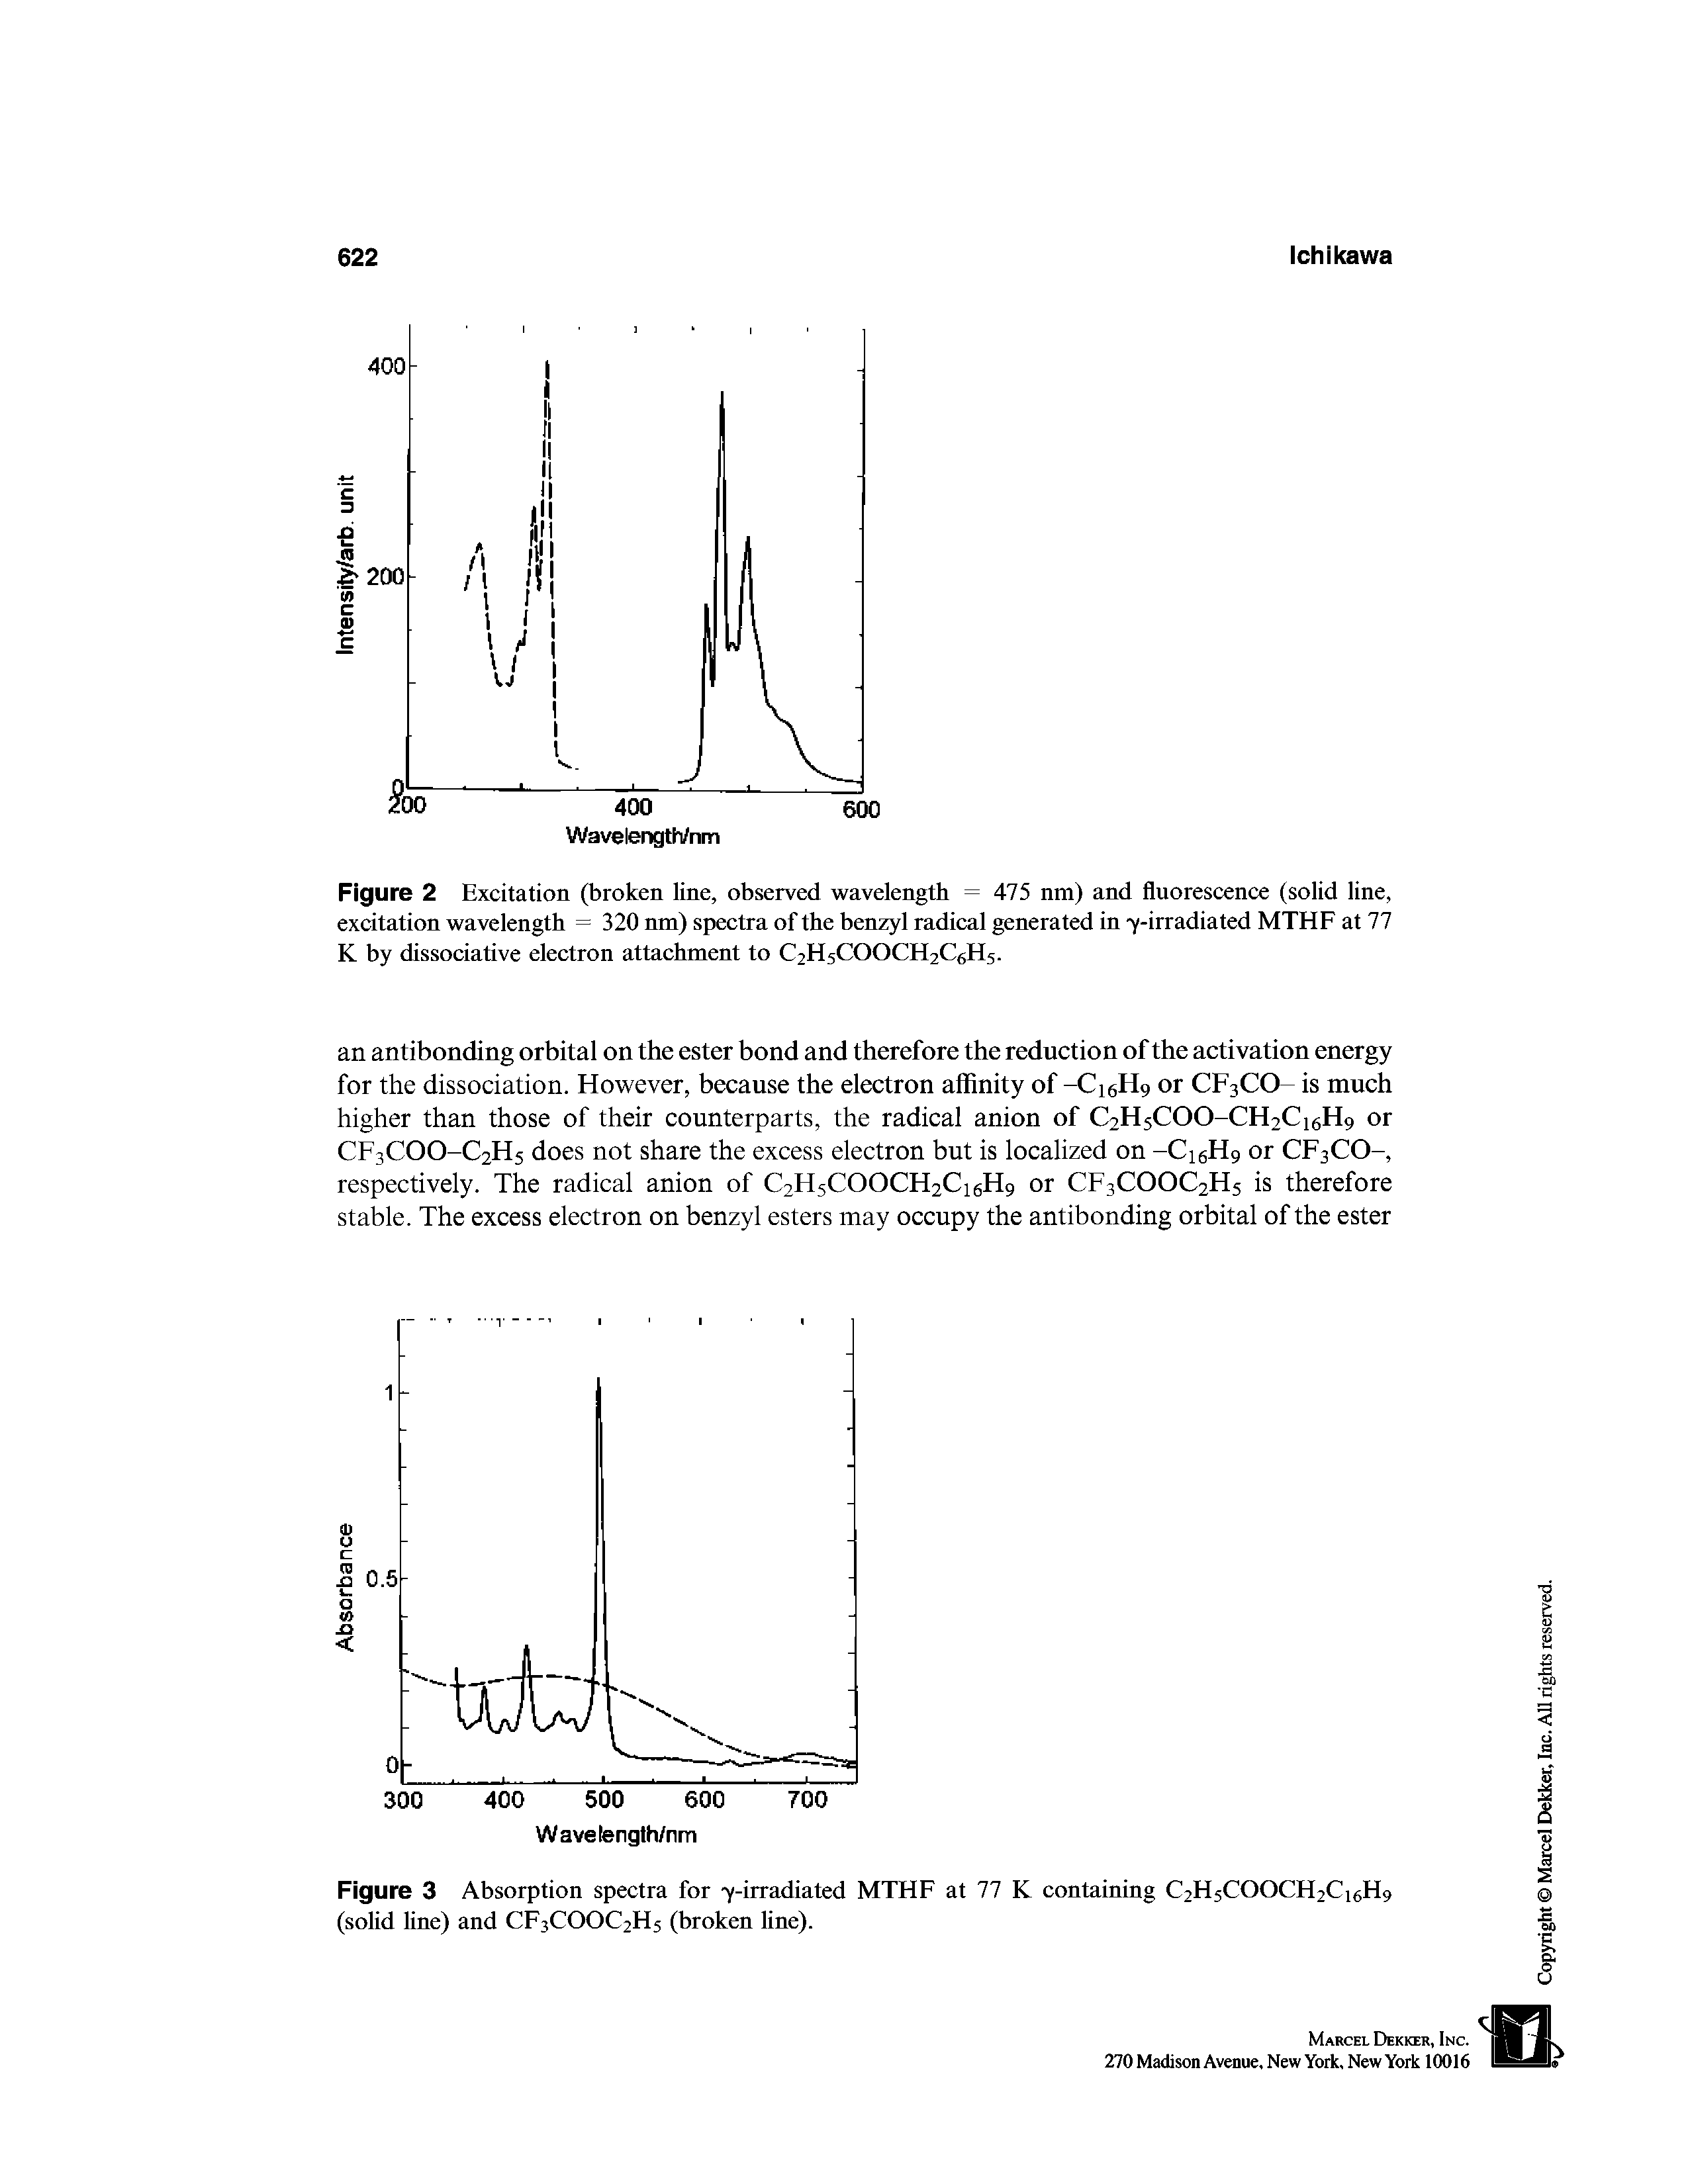 Figure 2 Excitation (broken line, observed wavelength = 475 nm) and fluorescence (solid line, excitation wavelength = 320 nm) spectra of the benzyl radical generated in y-irradiated MTHF at 77 K by dissociative electron attachment to C2H5COOCH2C6H5.